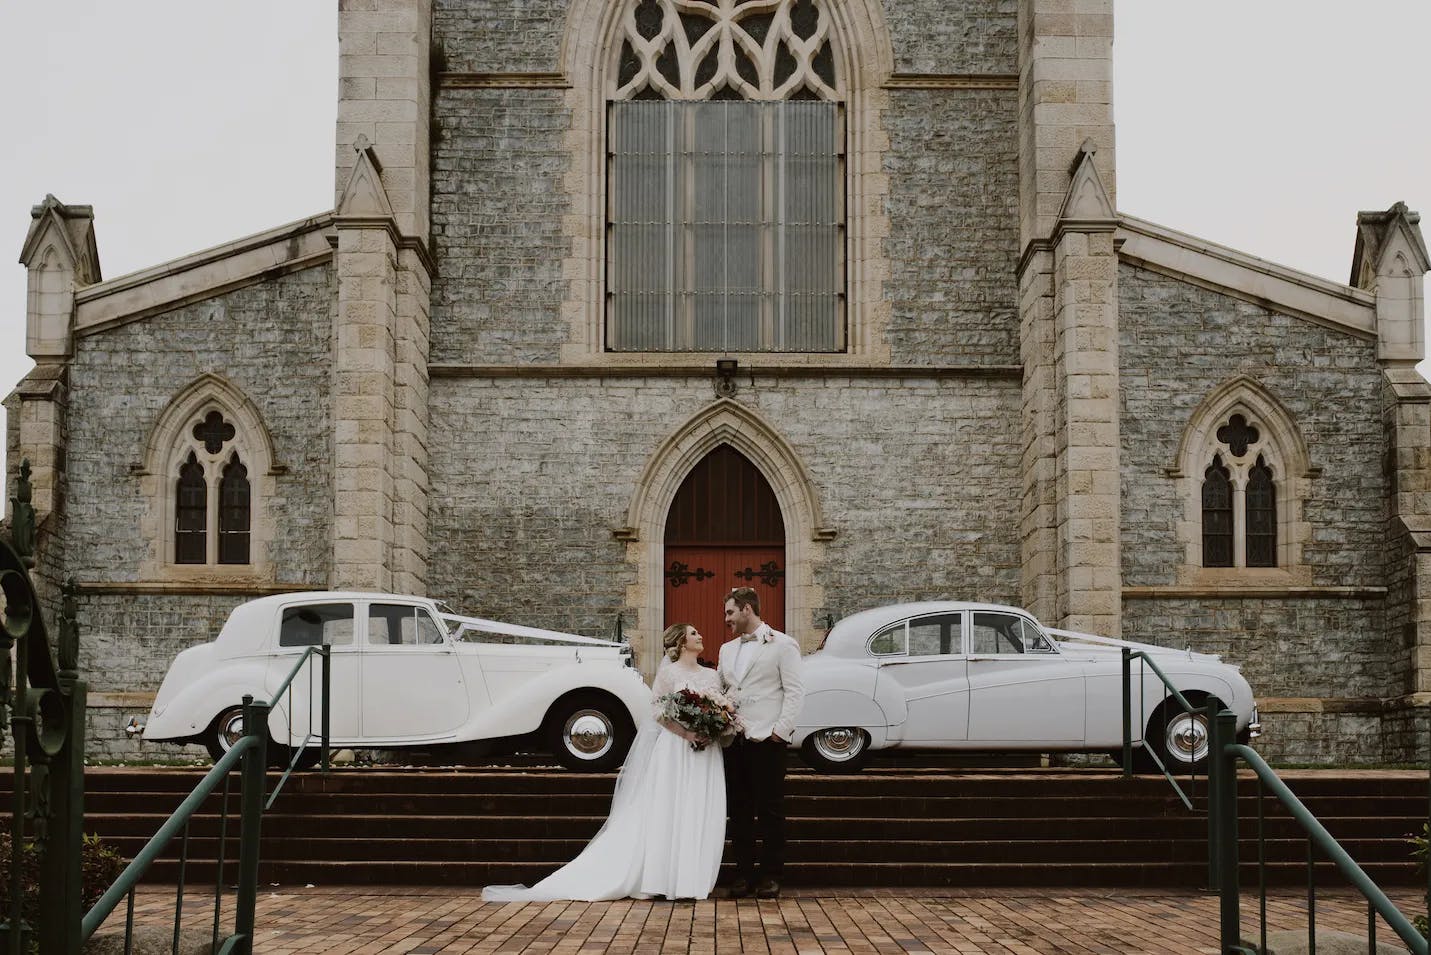 A bride and groom stand in front of an old stone church with large arched windows and a tall door. The bride wears a white gown and holds a bouquet, while the groom wears a light-colored suit. Two vintage white cars are parked on either side of the stairs.